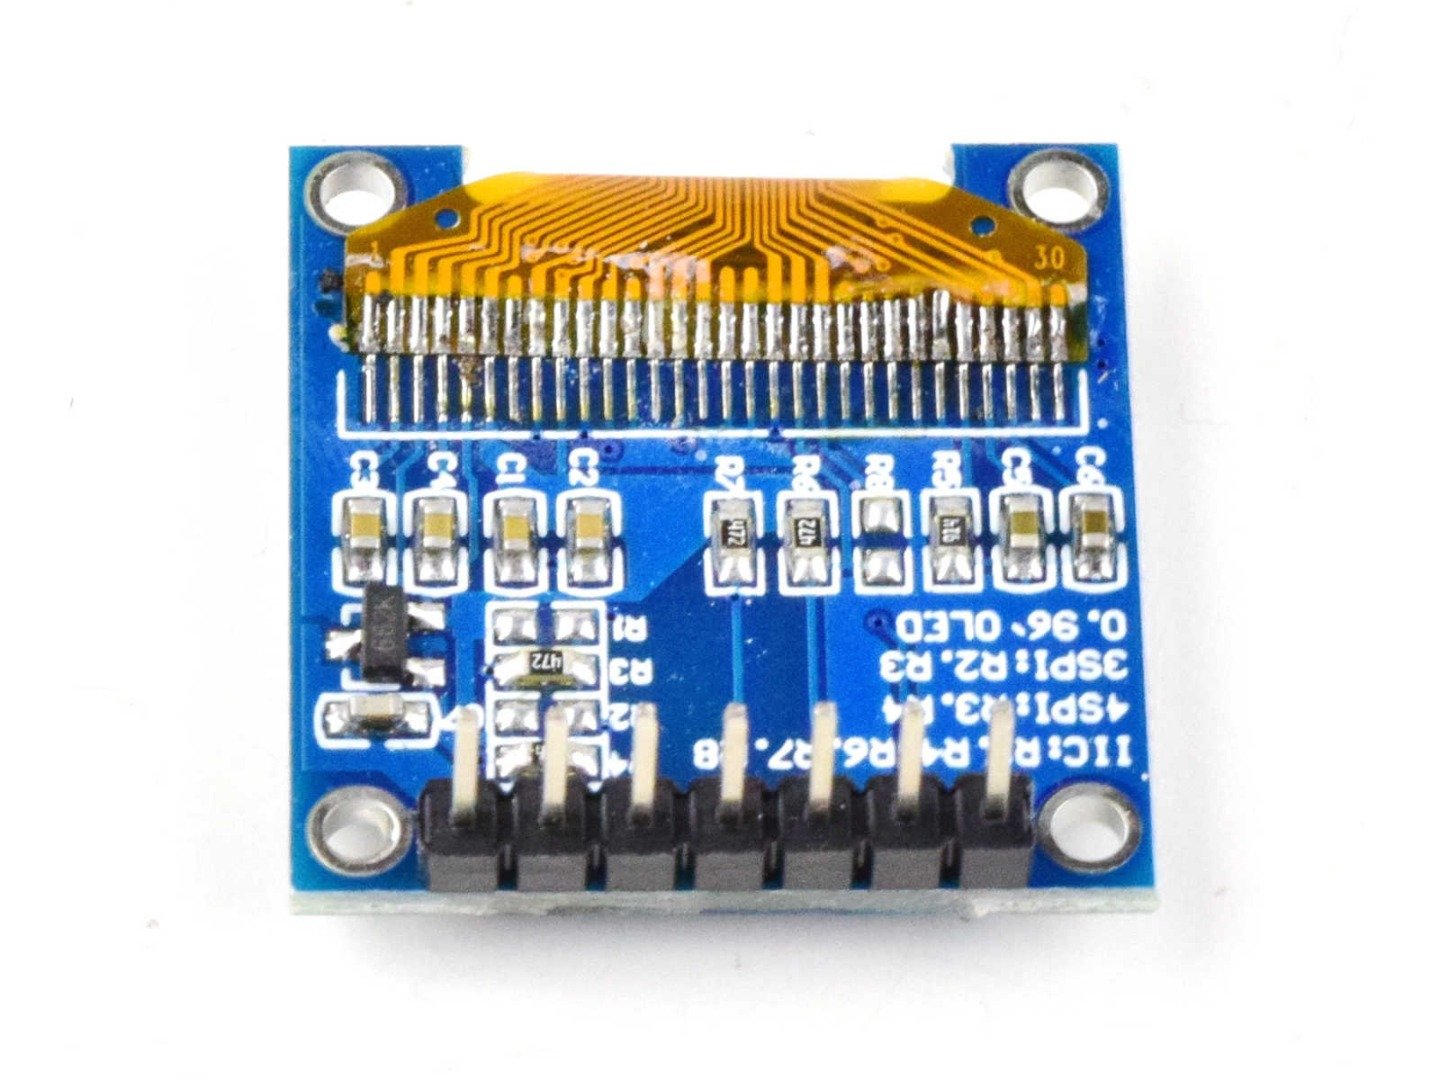 OLED Display 0.96 inch 128×64 with SPI interface – 3-5V (100% compatible with Arduino) 9